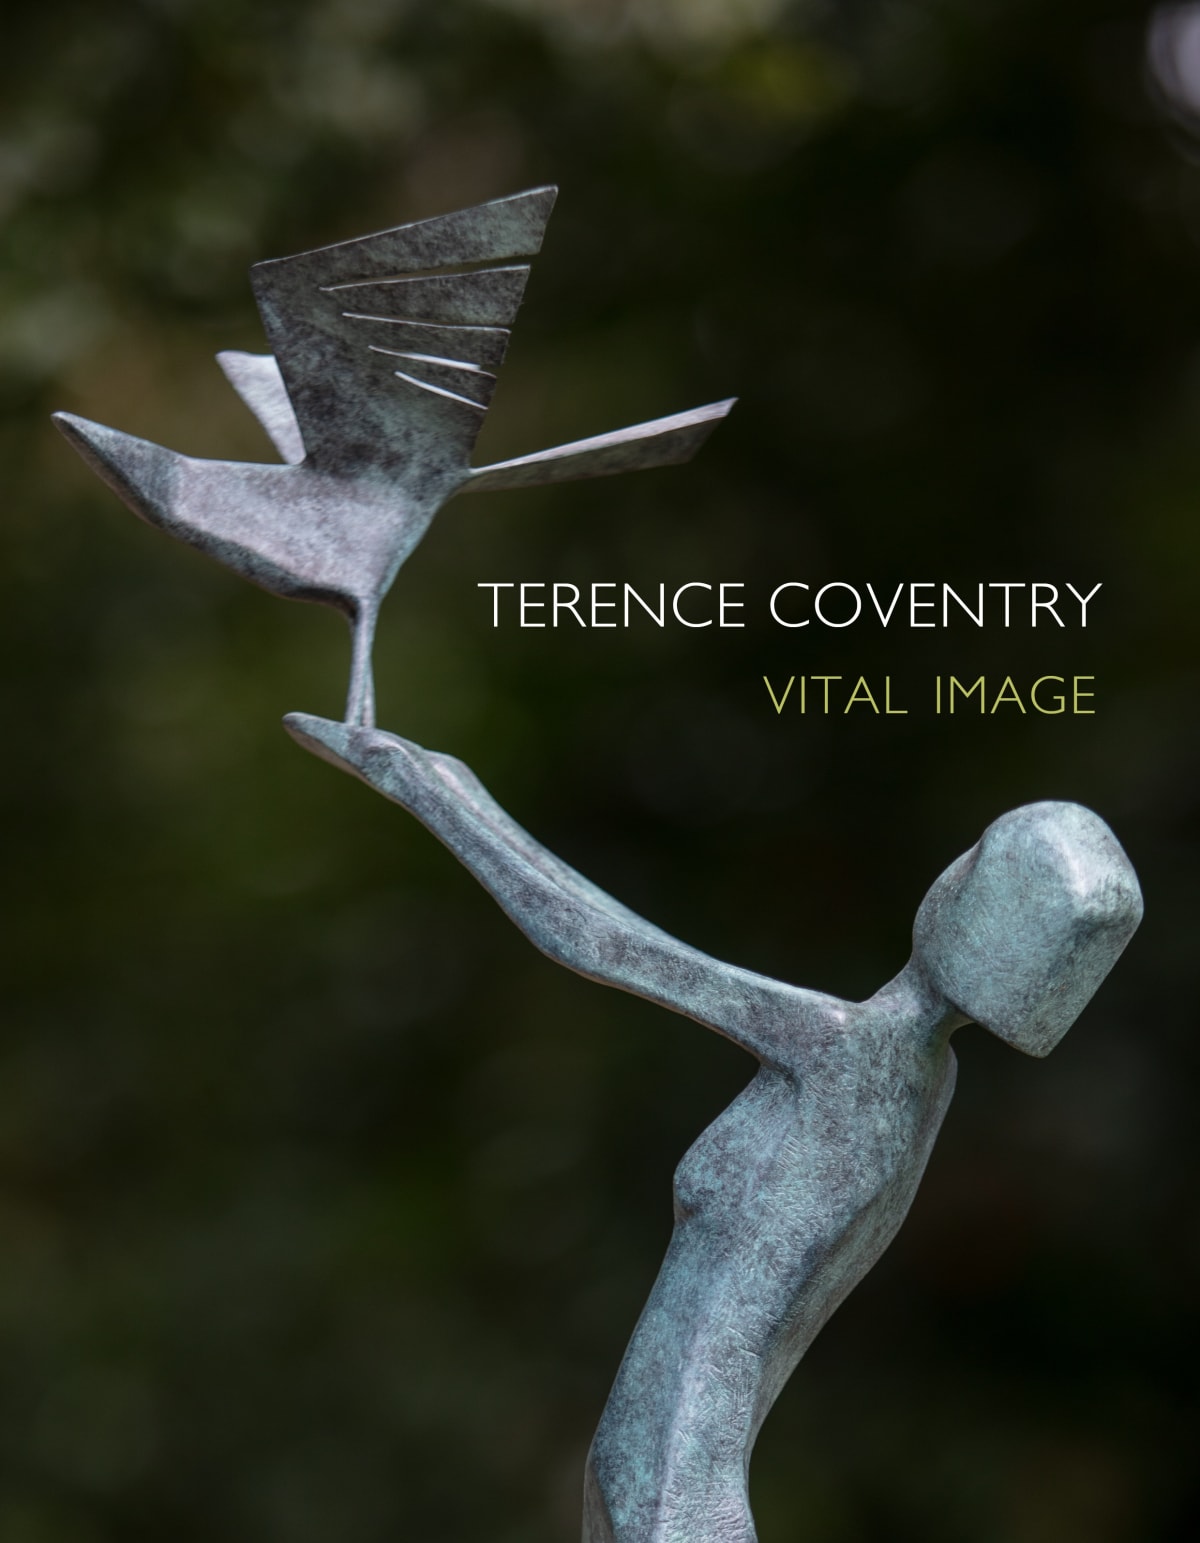 Terence Coventry